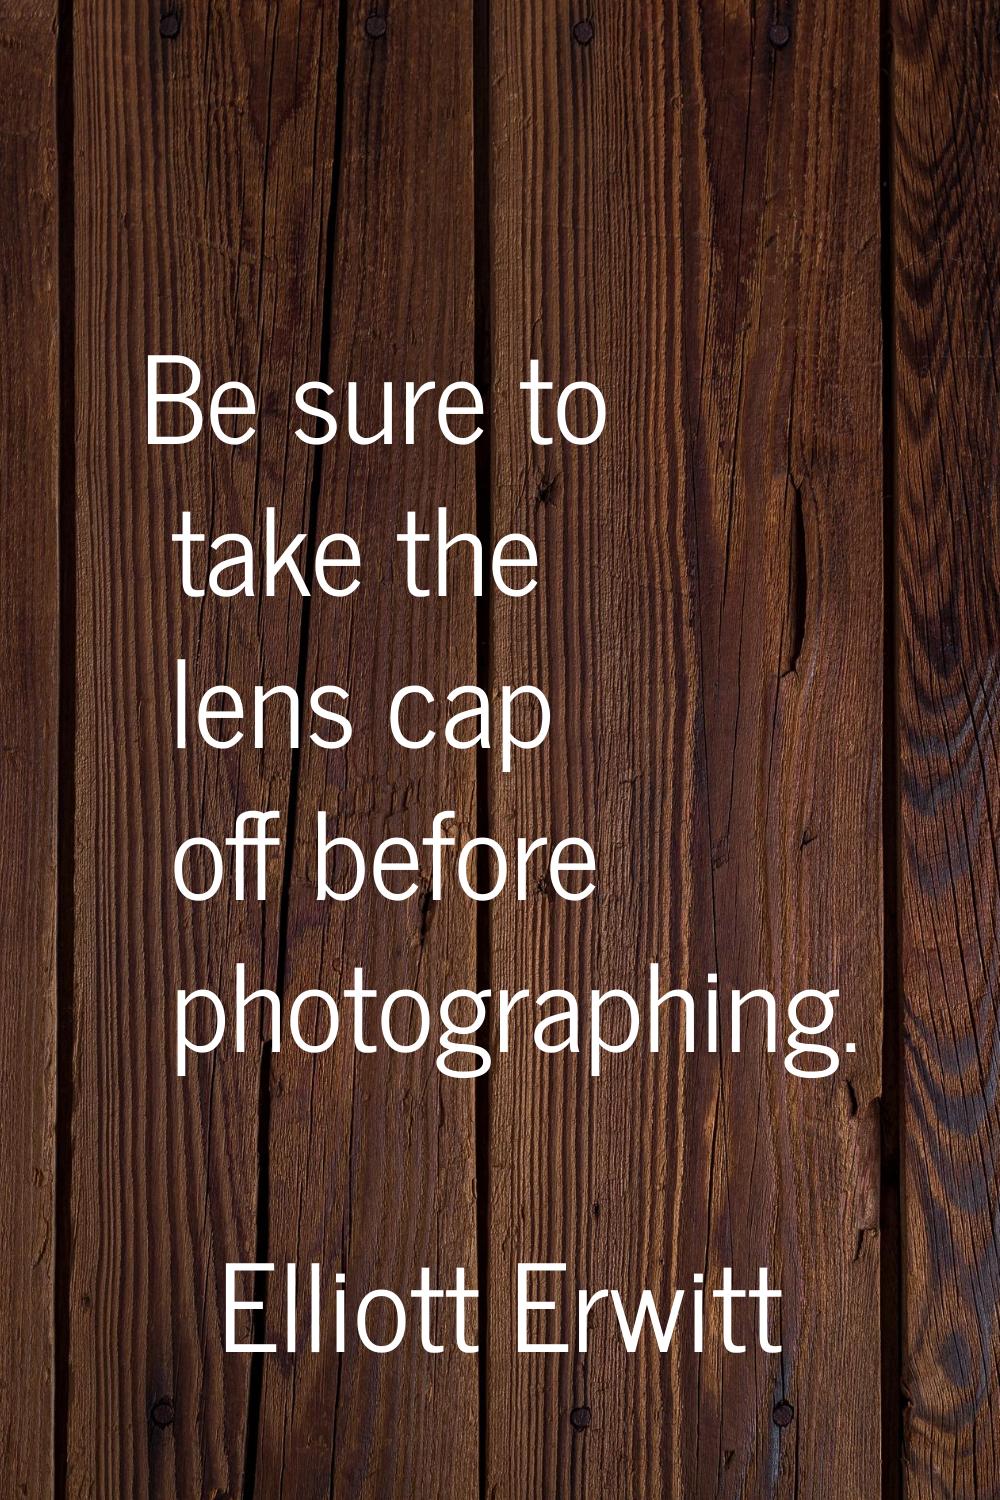 Be sure to take the lens cap off before photographing.